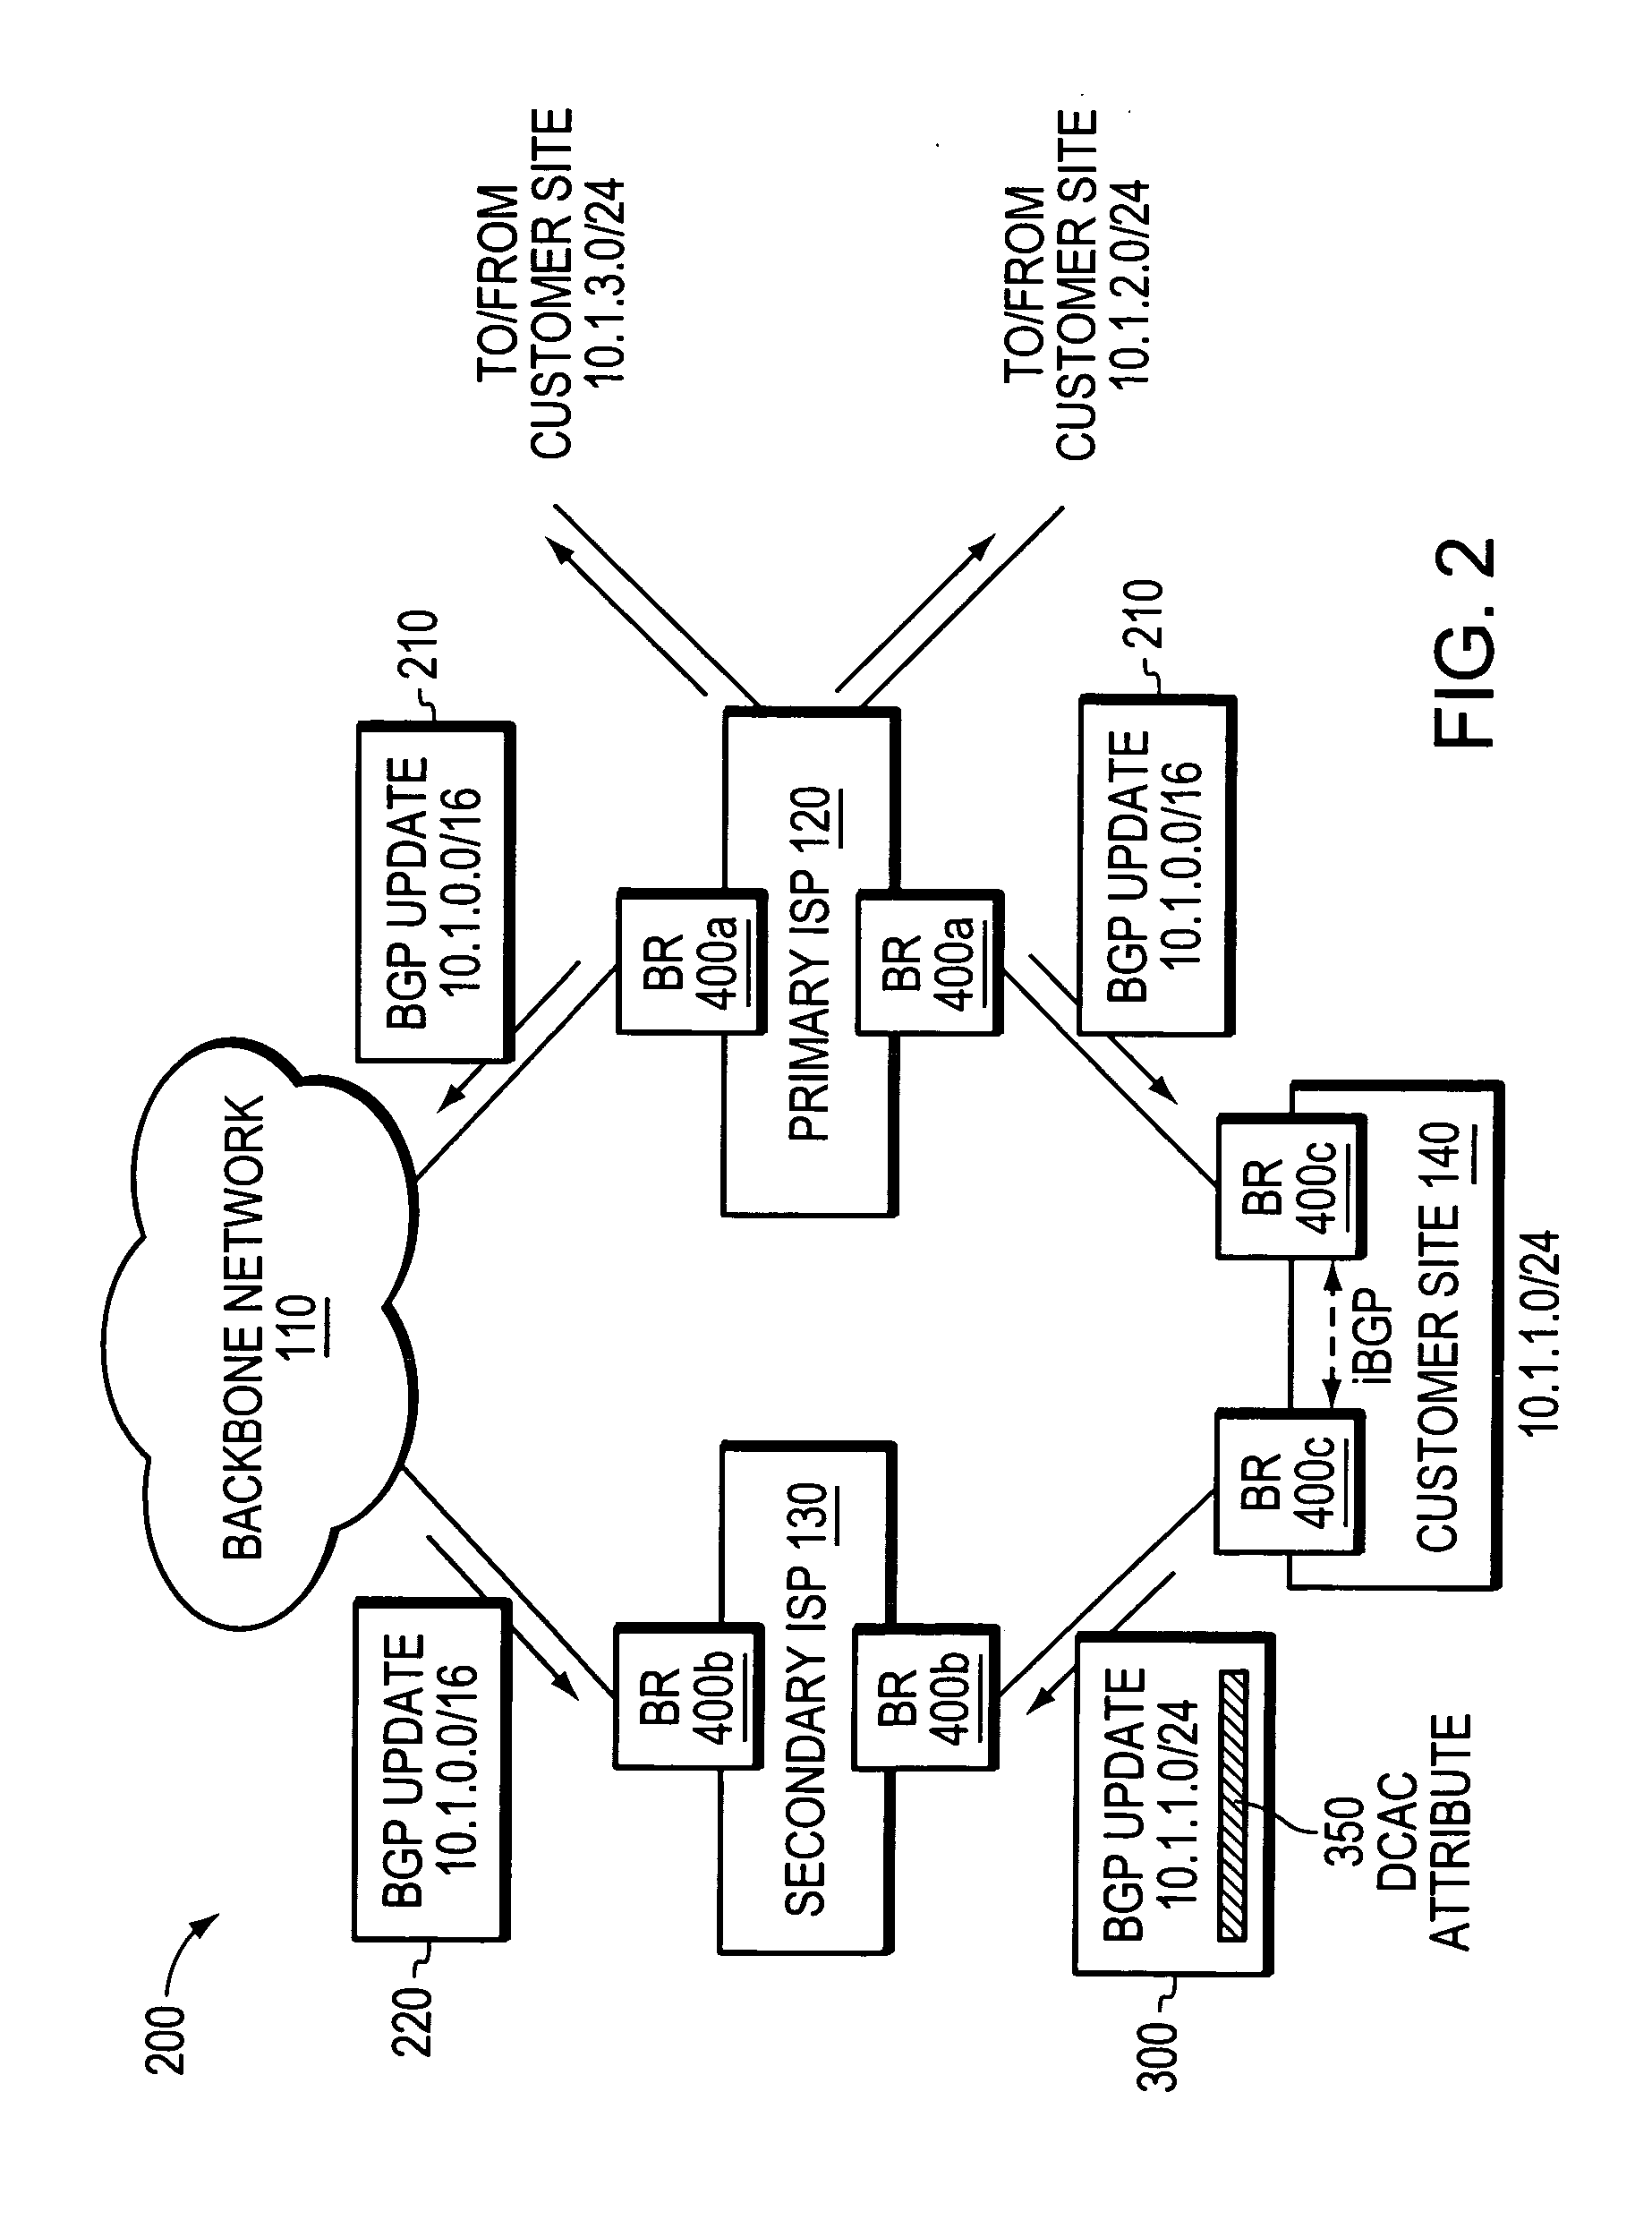 Multi-homing using controlled route leakage at a backup service provider